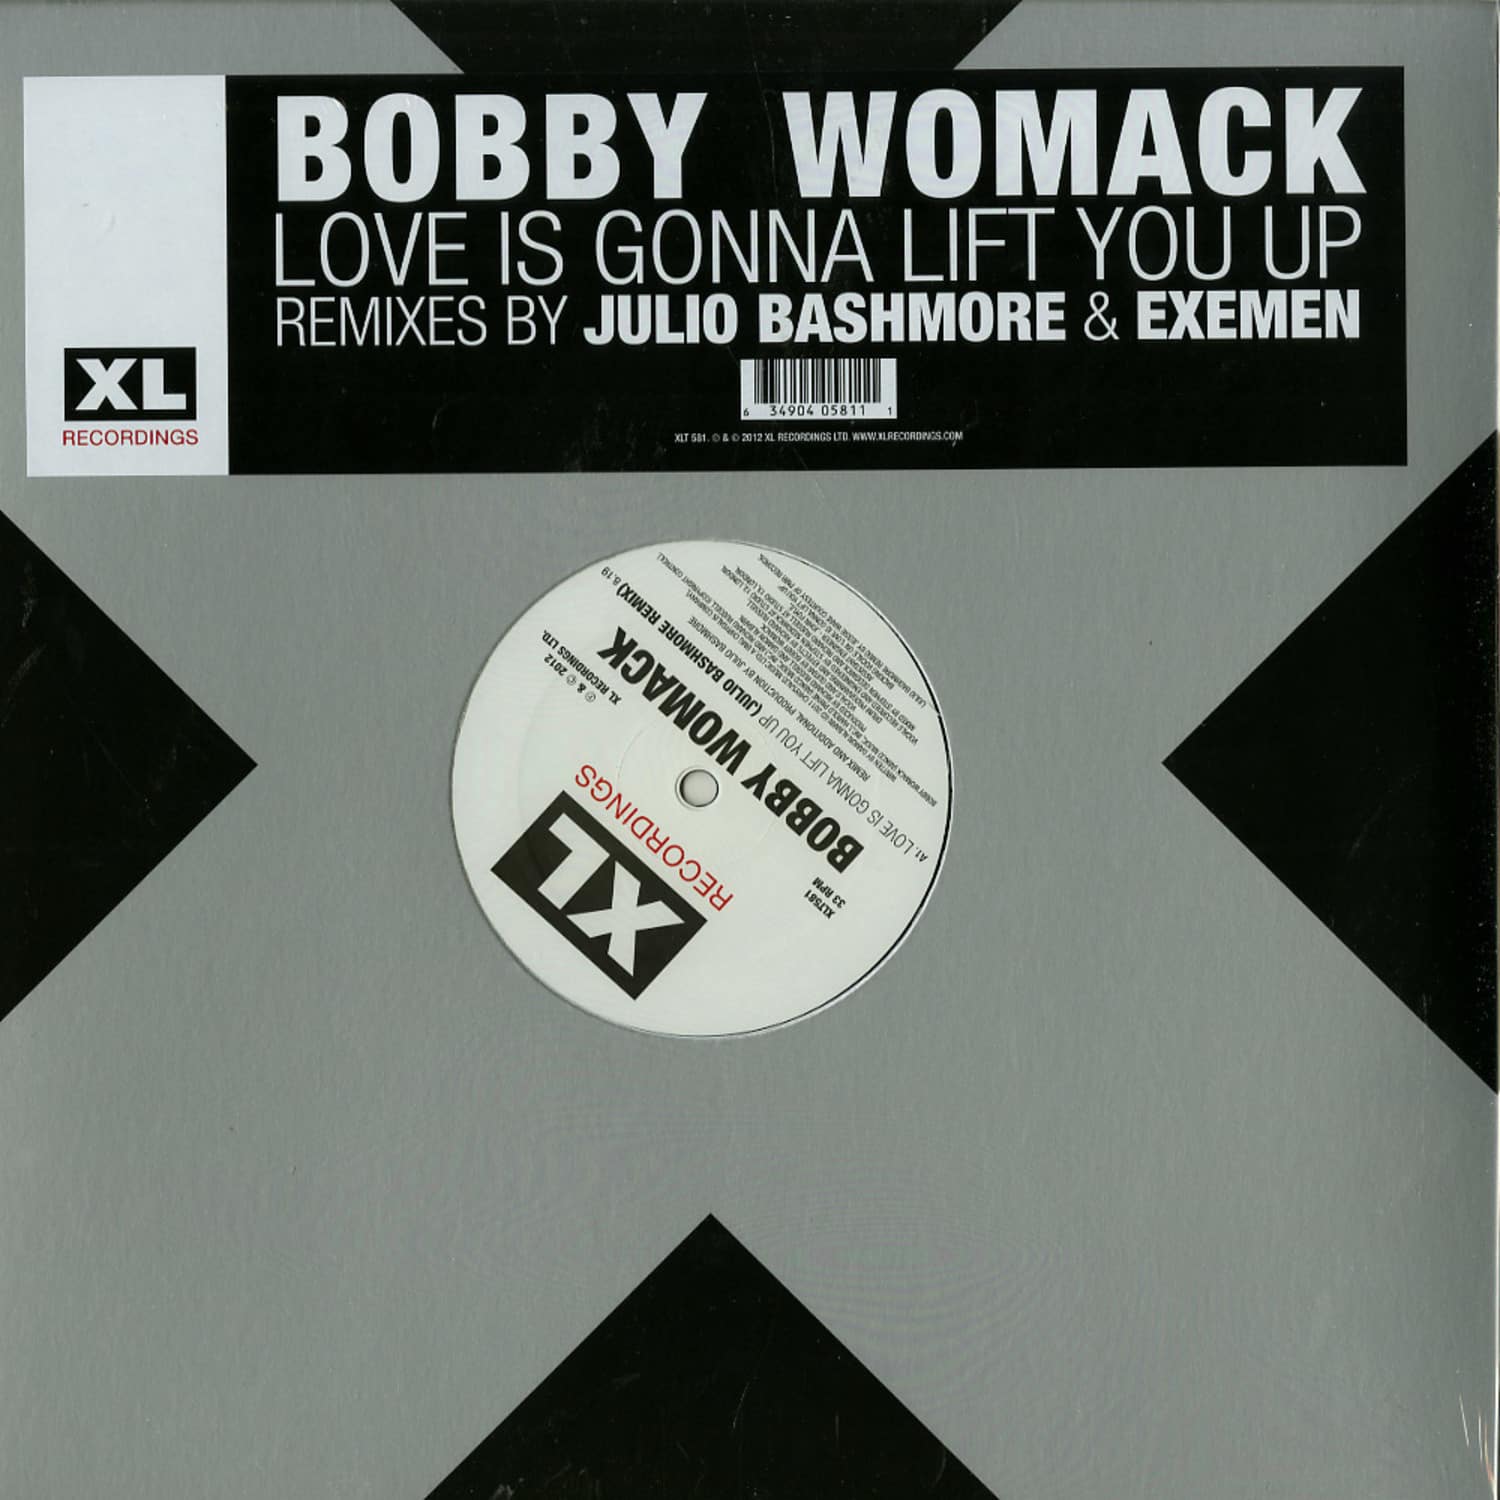 Bobby Womack - LOVE IS GONNA LIFT YOU UP/ JULIO BASHMORE REMIX